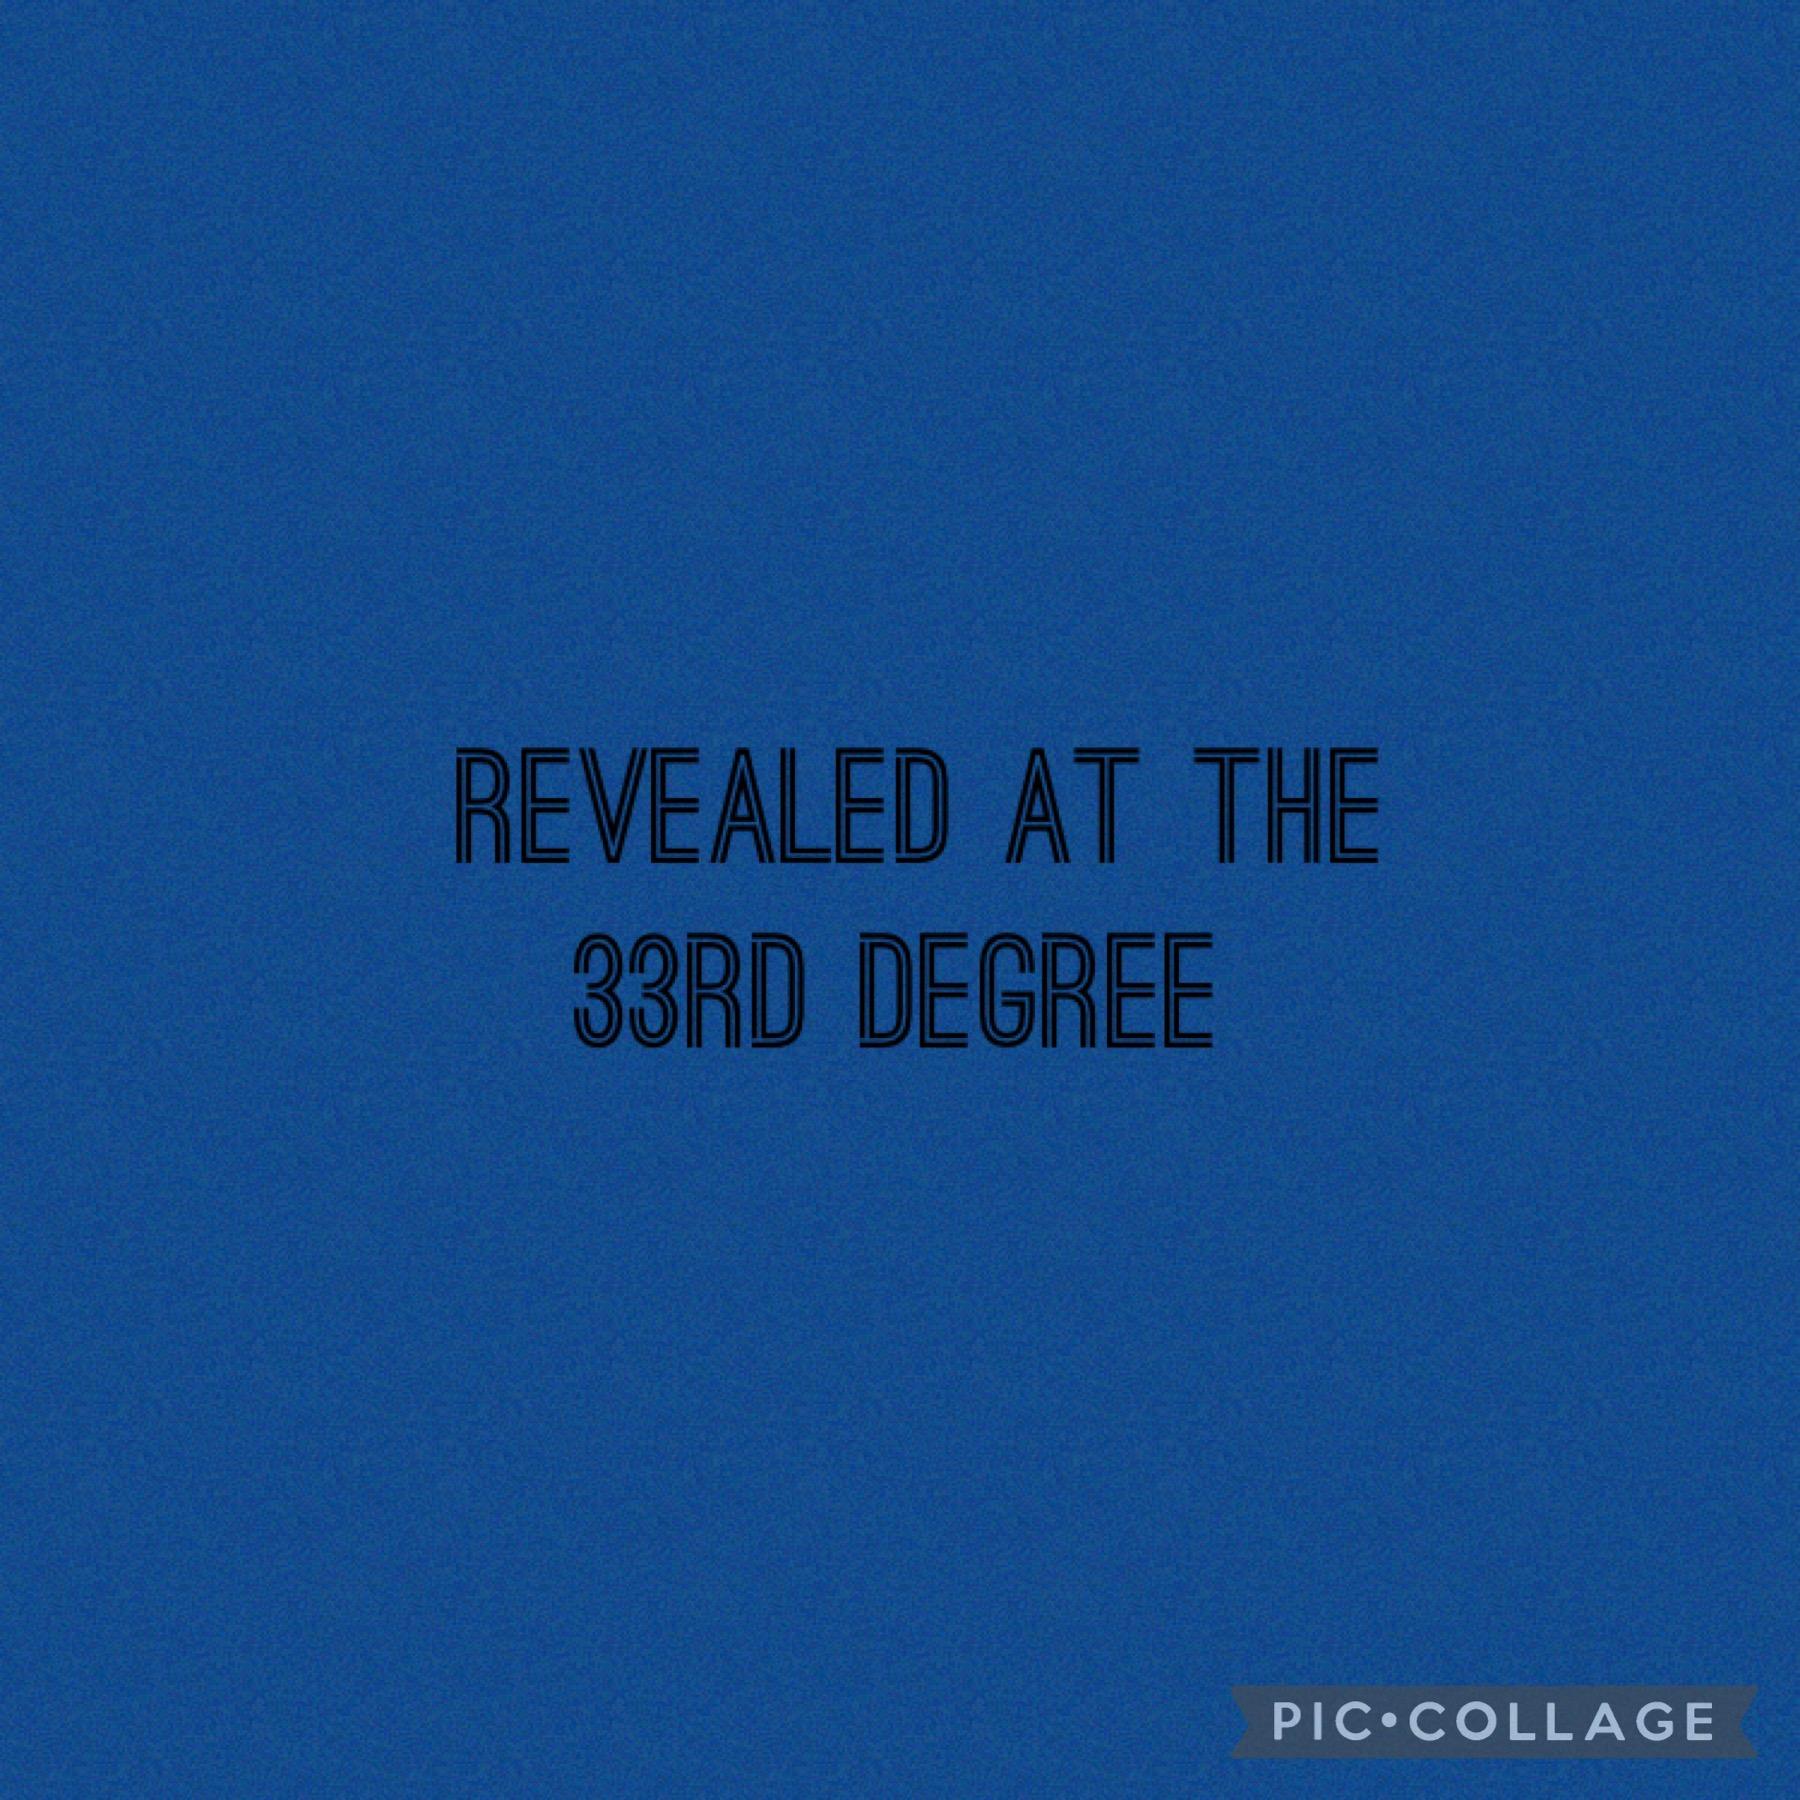 Revealed at the 33rd degree